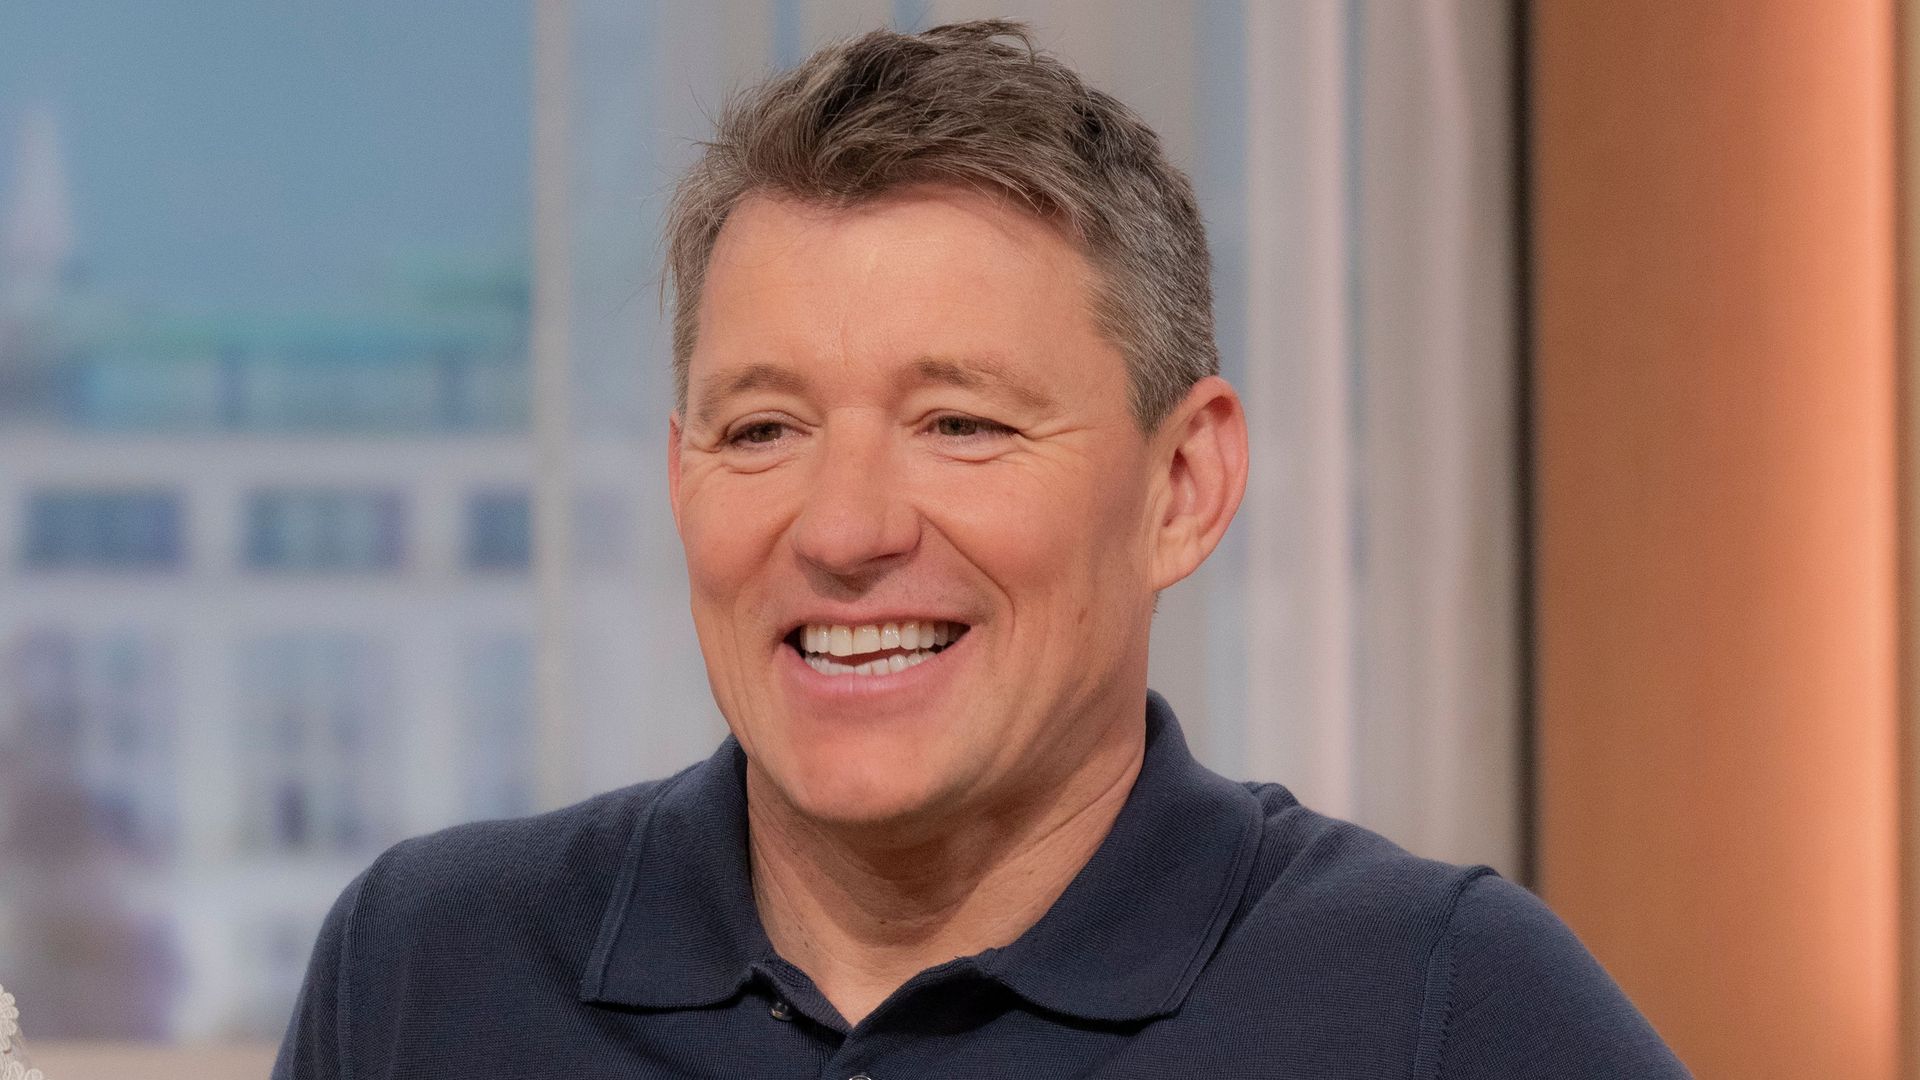 Ben Shephard shares ultra-rare photo of lookalike dad for special reason